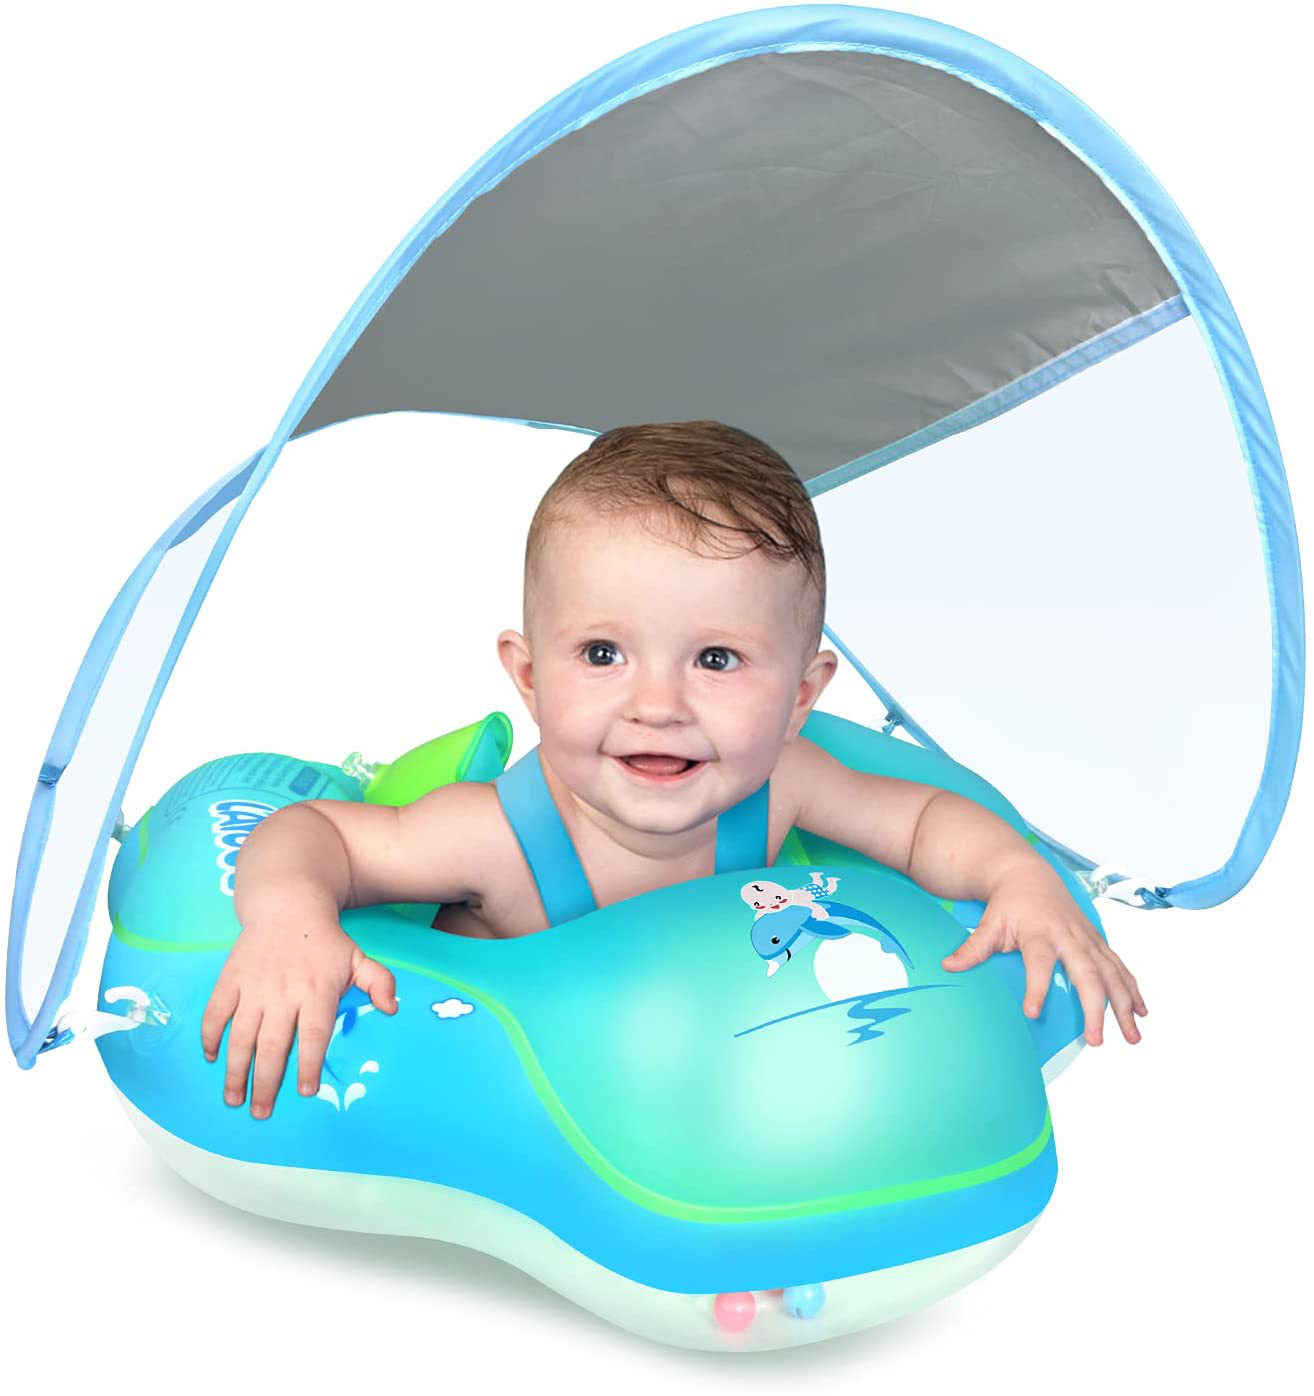 LAYCOL Baby Swimming Float Inflatable Baby Pool Float Ring Newest with Sun Protection Canopy,add Tail no flip Over for Age of 3-36 Months (Orange, L)